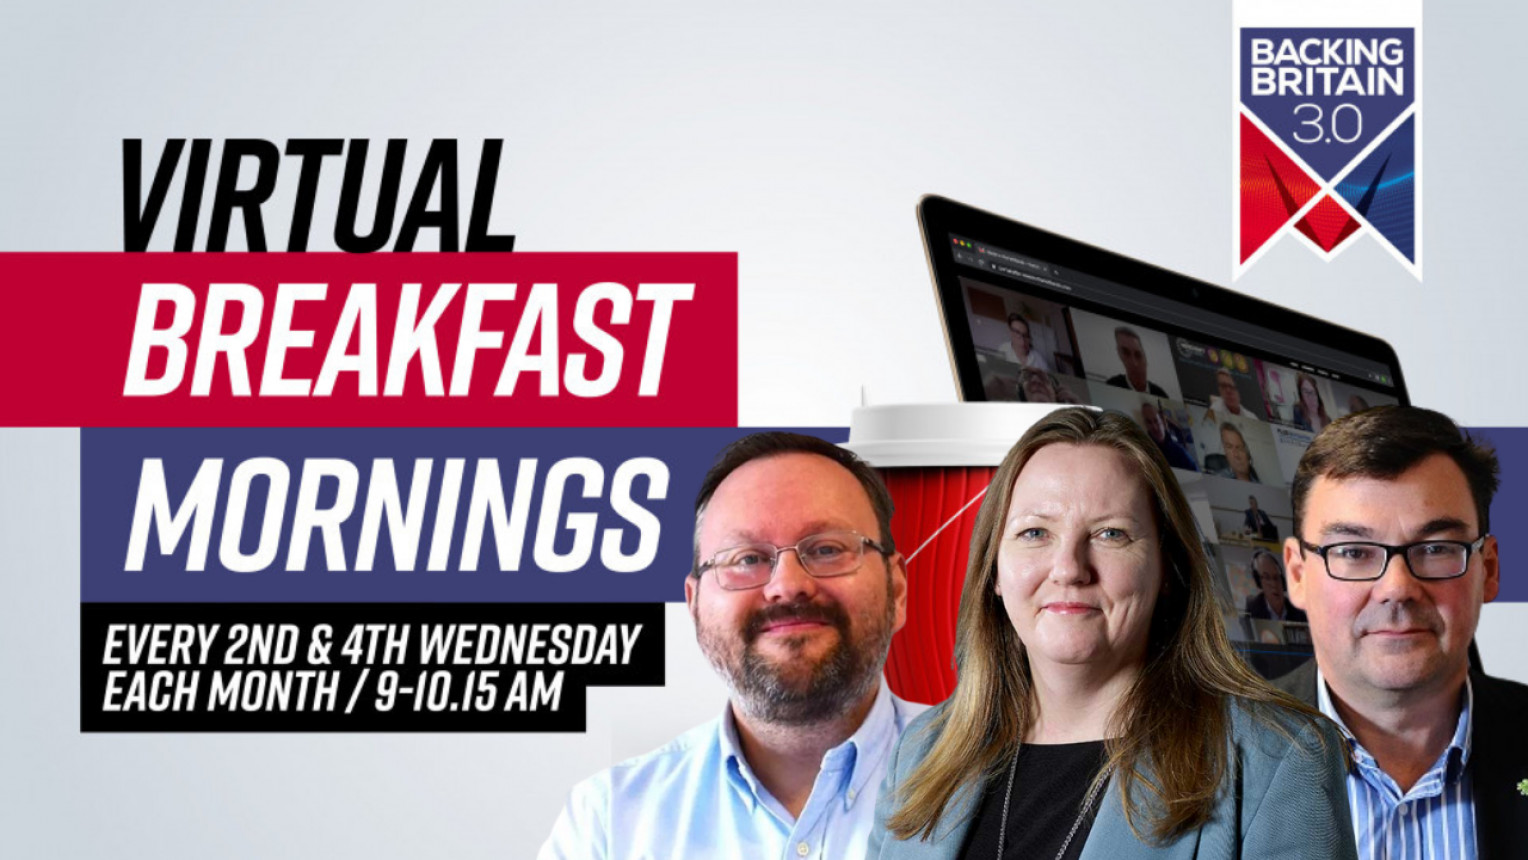 Backing Britain Virtual Breakfast Morning with AMCO, Sempre Group & Siddall & Hilton